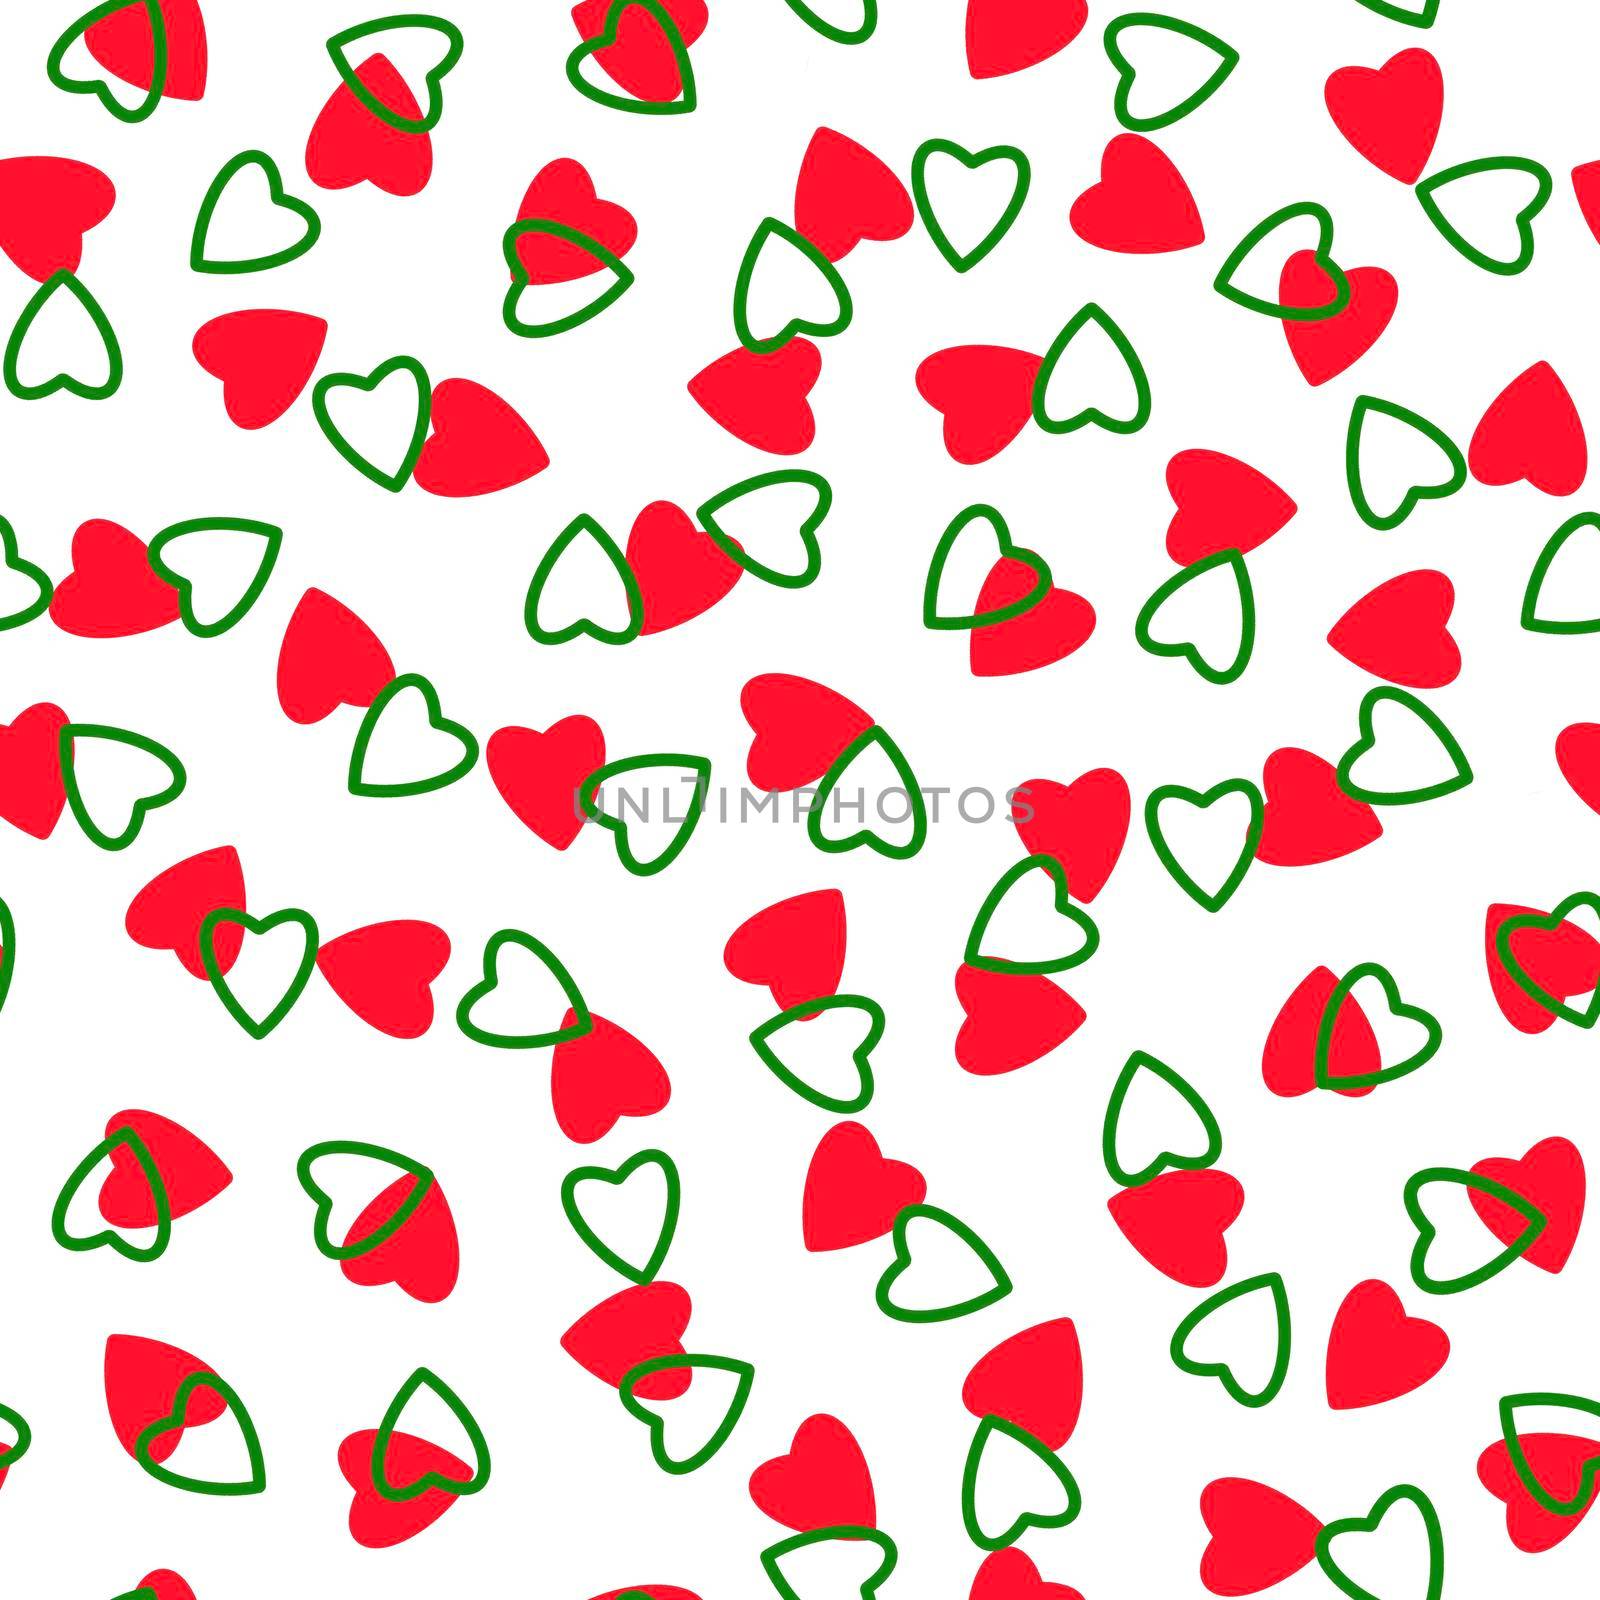 Simple hearts seamless pattern,endless chaotic texture made of tiny heart silhouettes.Valentines,mothers day background.Great for Easter,wedding,scrapbook,gift wrapping paper,textiles.Red,green,white.